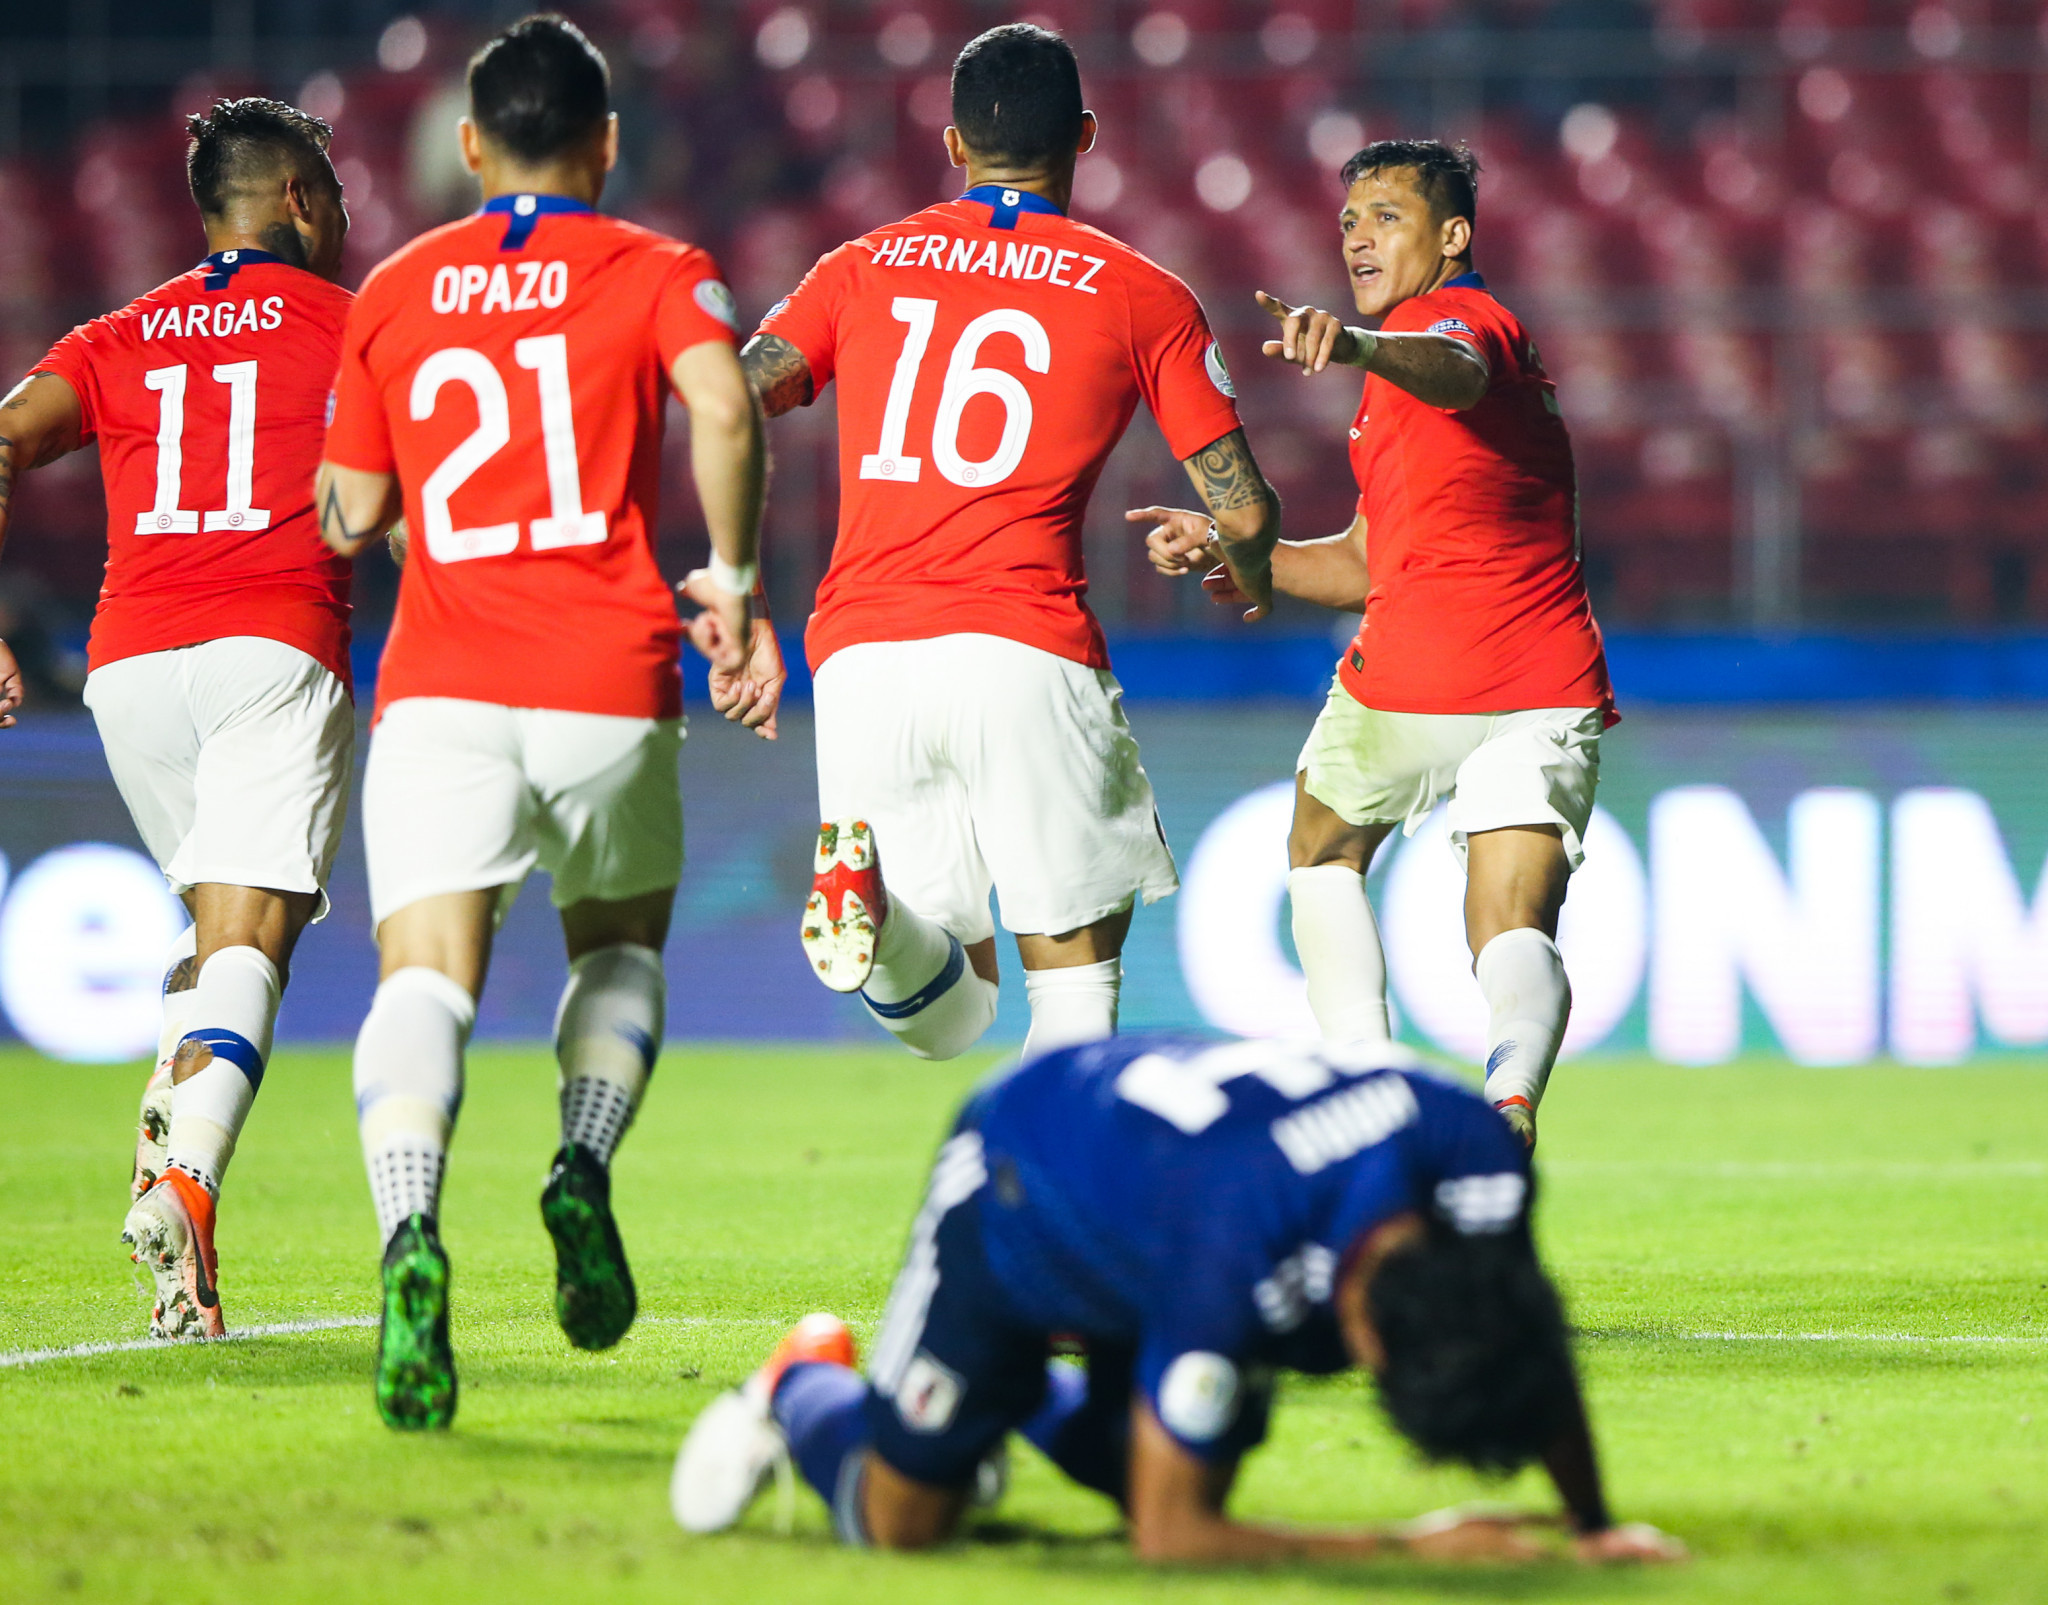 Reigning Copa América champions Chile got their title defence off to the perfect start with a 4-0 thrashing of guest nation Japan ©Getty Images